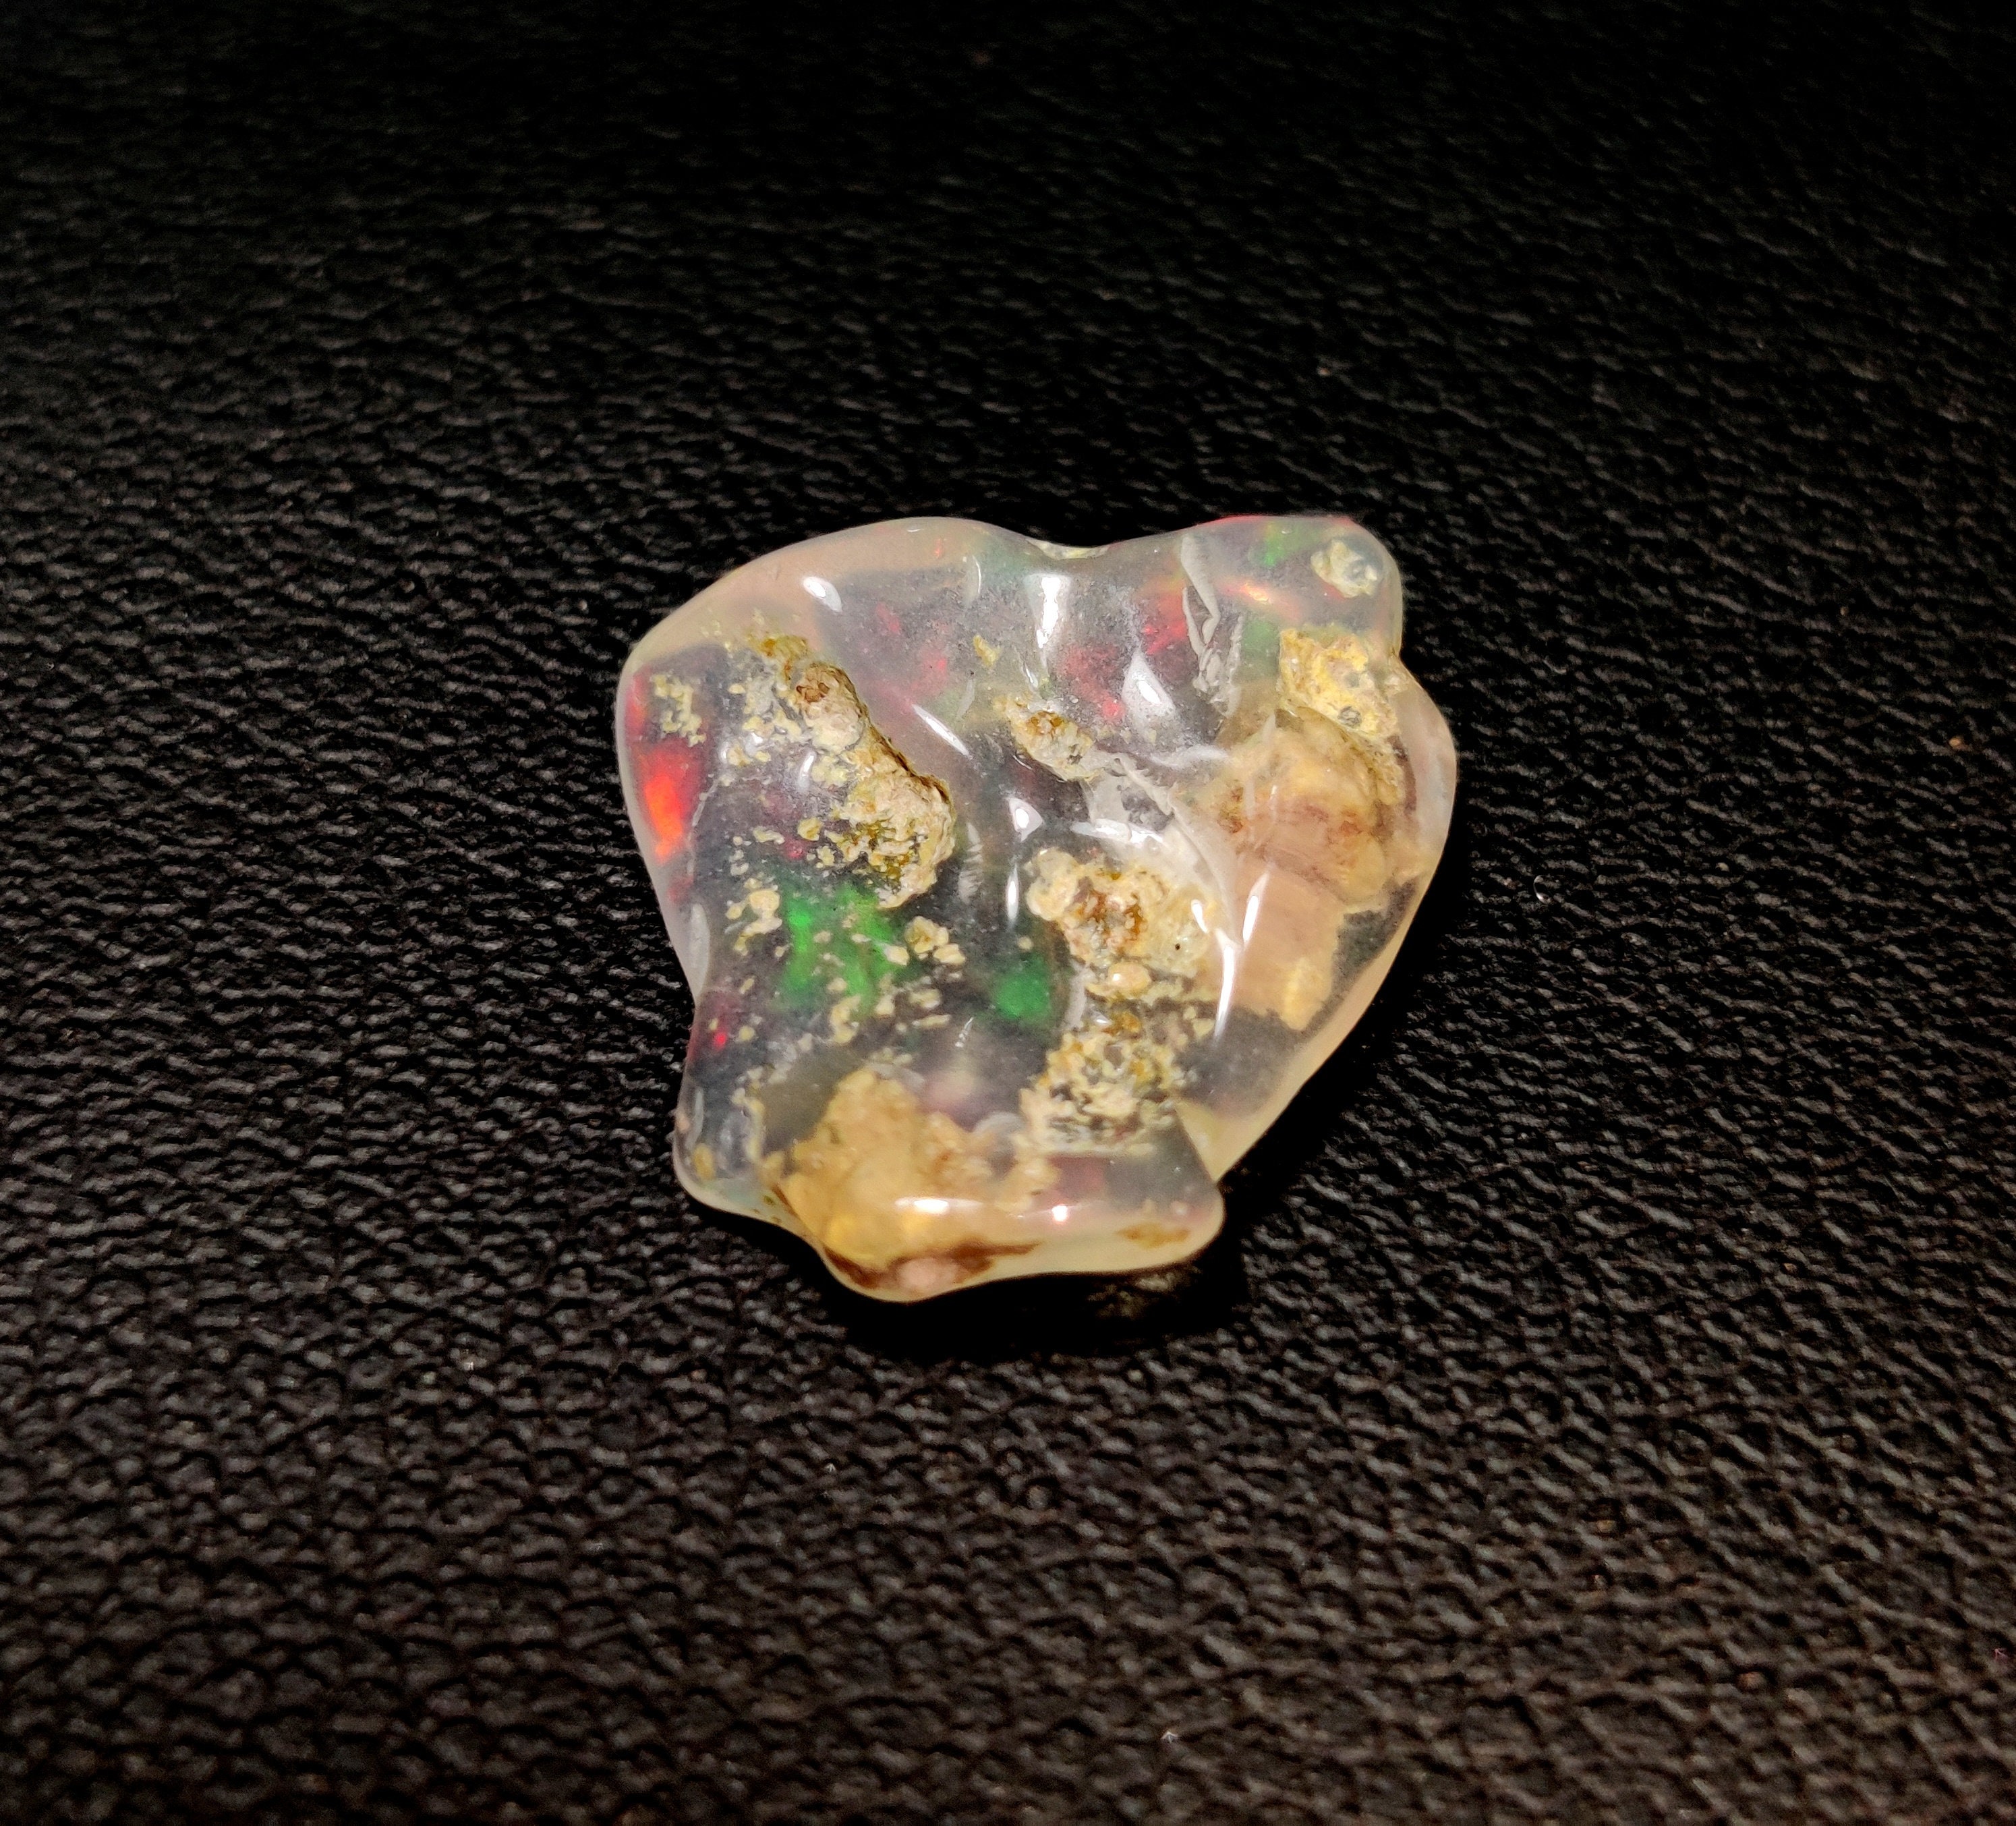 ETHIOPIAN OPAL ROUGH Gemstone 3Ct Top Quality Natural Welo Fire Ethiopian Opal Untreated Raw Material Rough Loose Gemstone Opal 15x13x4MM